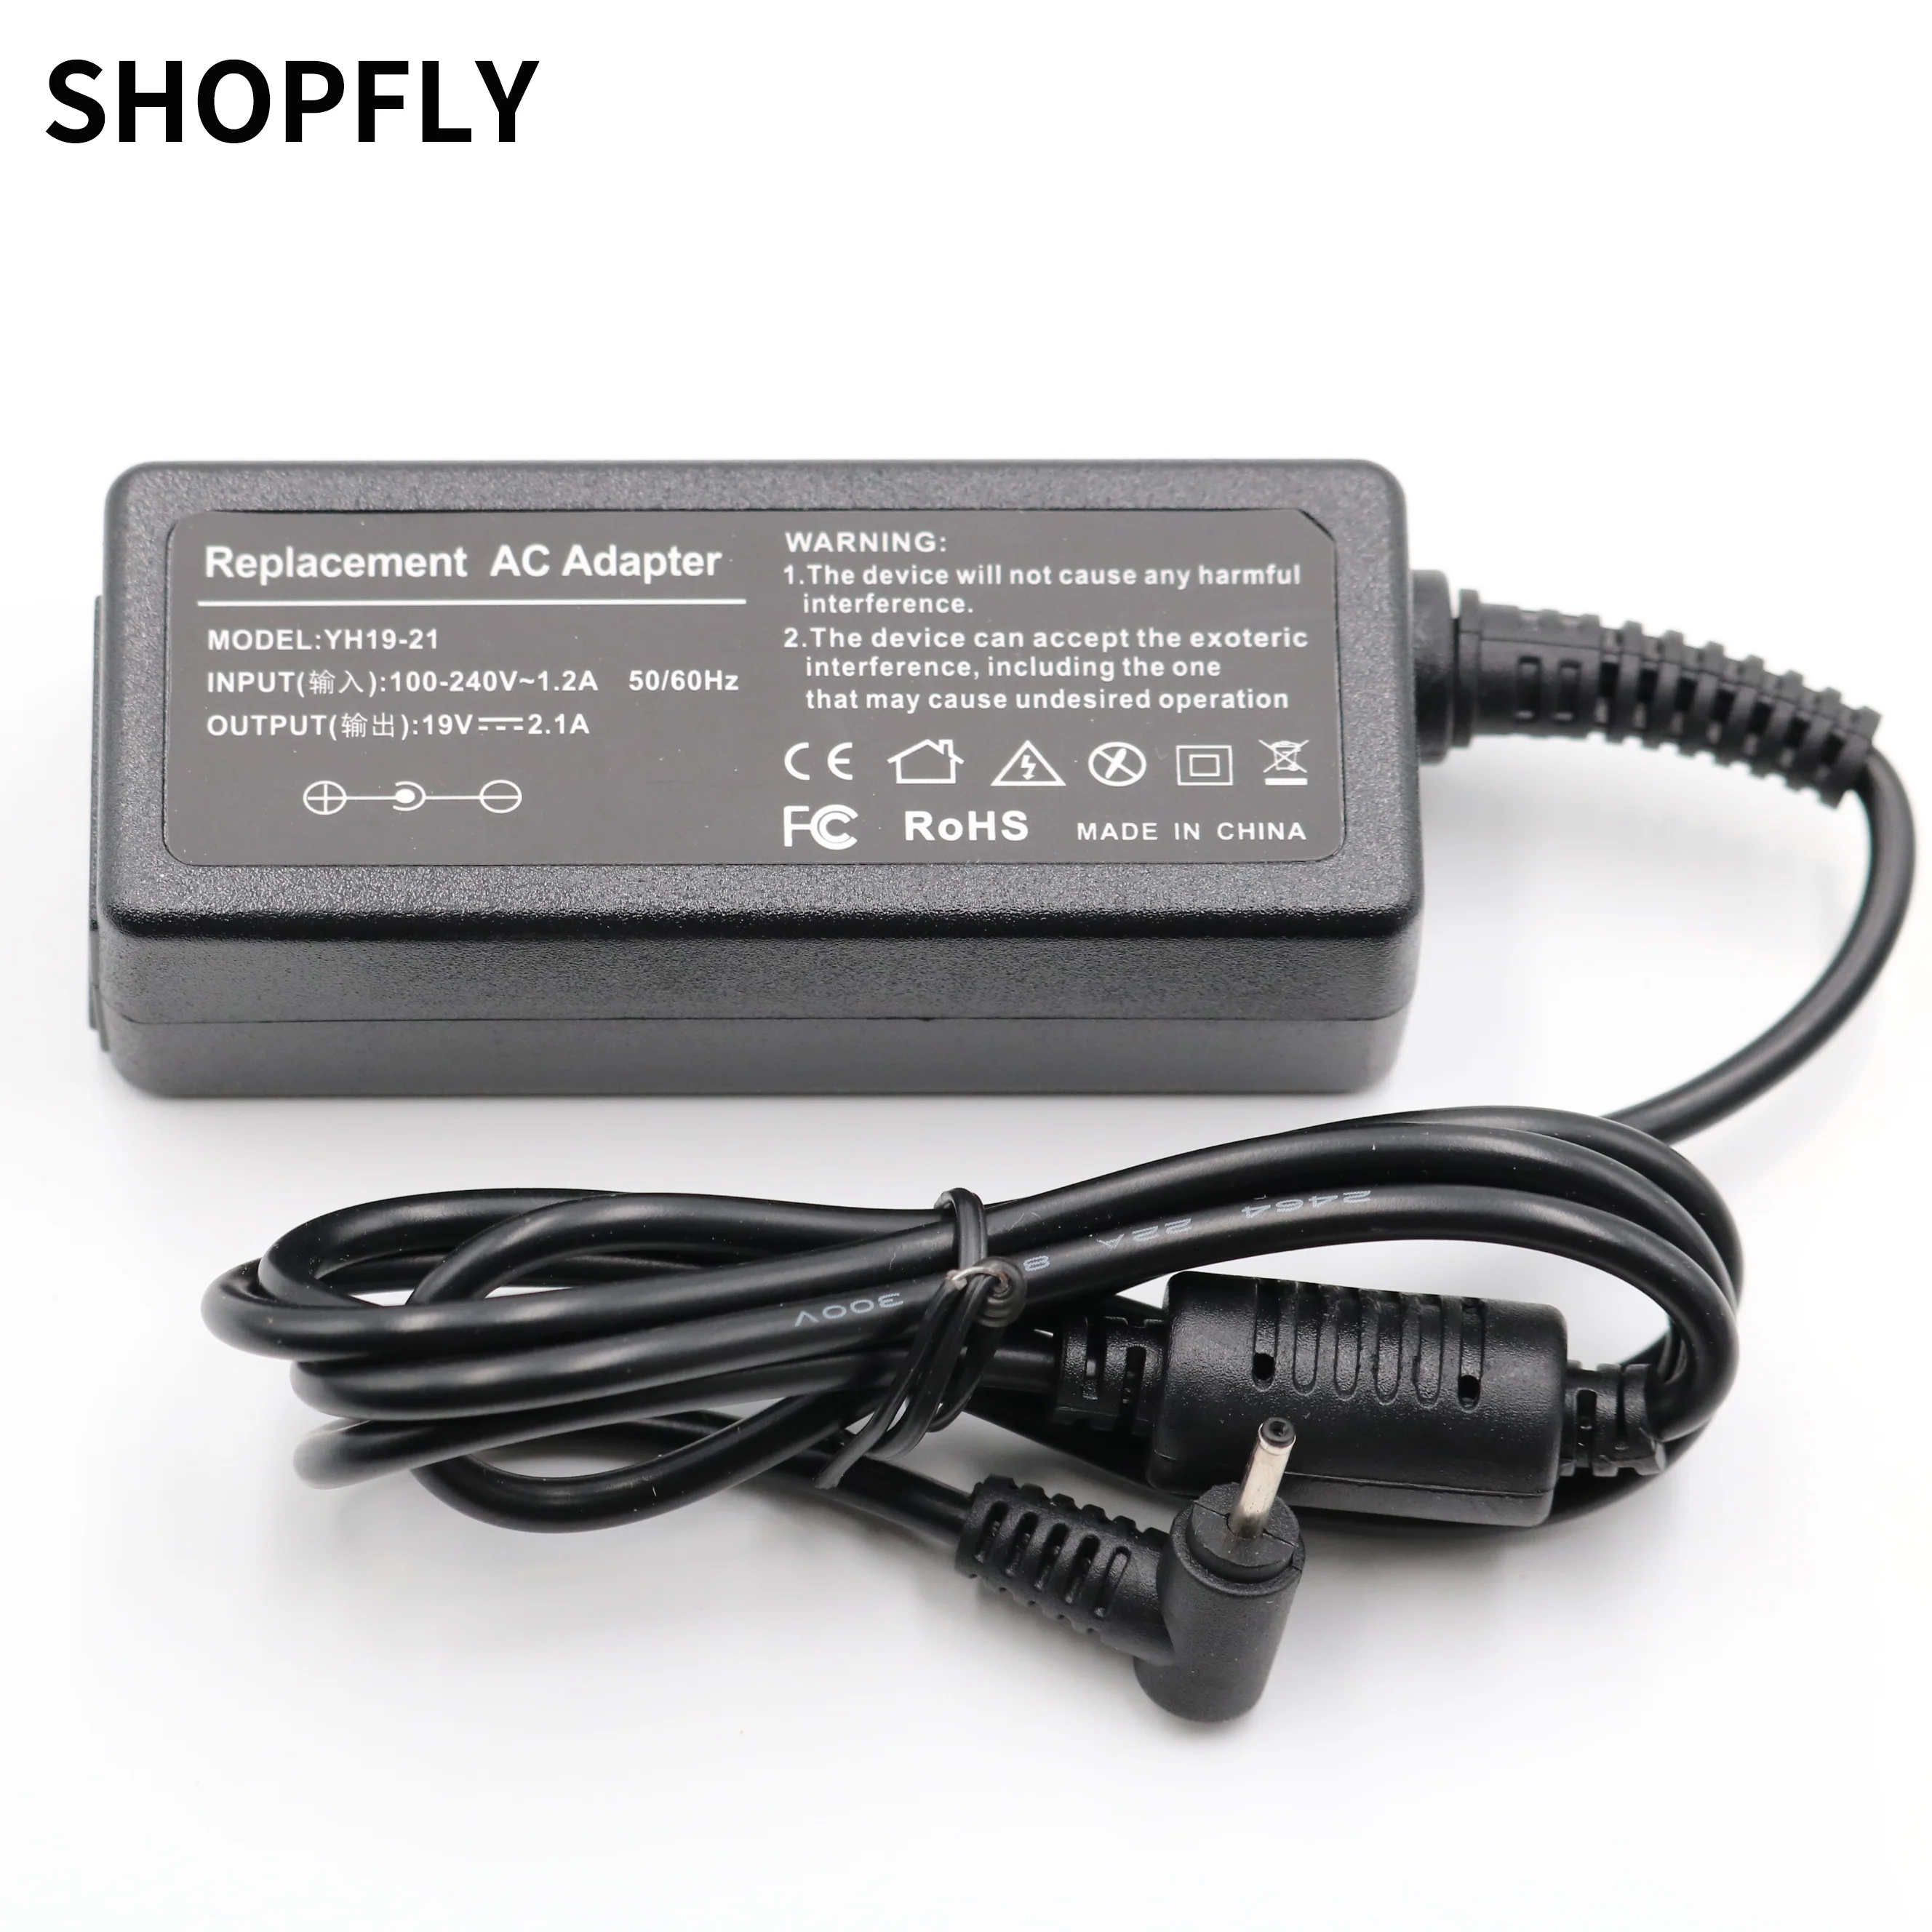 AC Adapter for ASUS Mini Eee PC1005HA 1005HAB 1005HAG Charger Power Supply Cord 